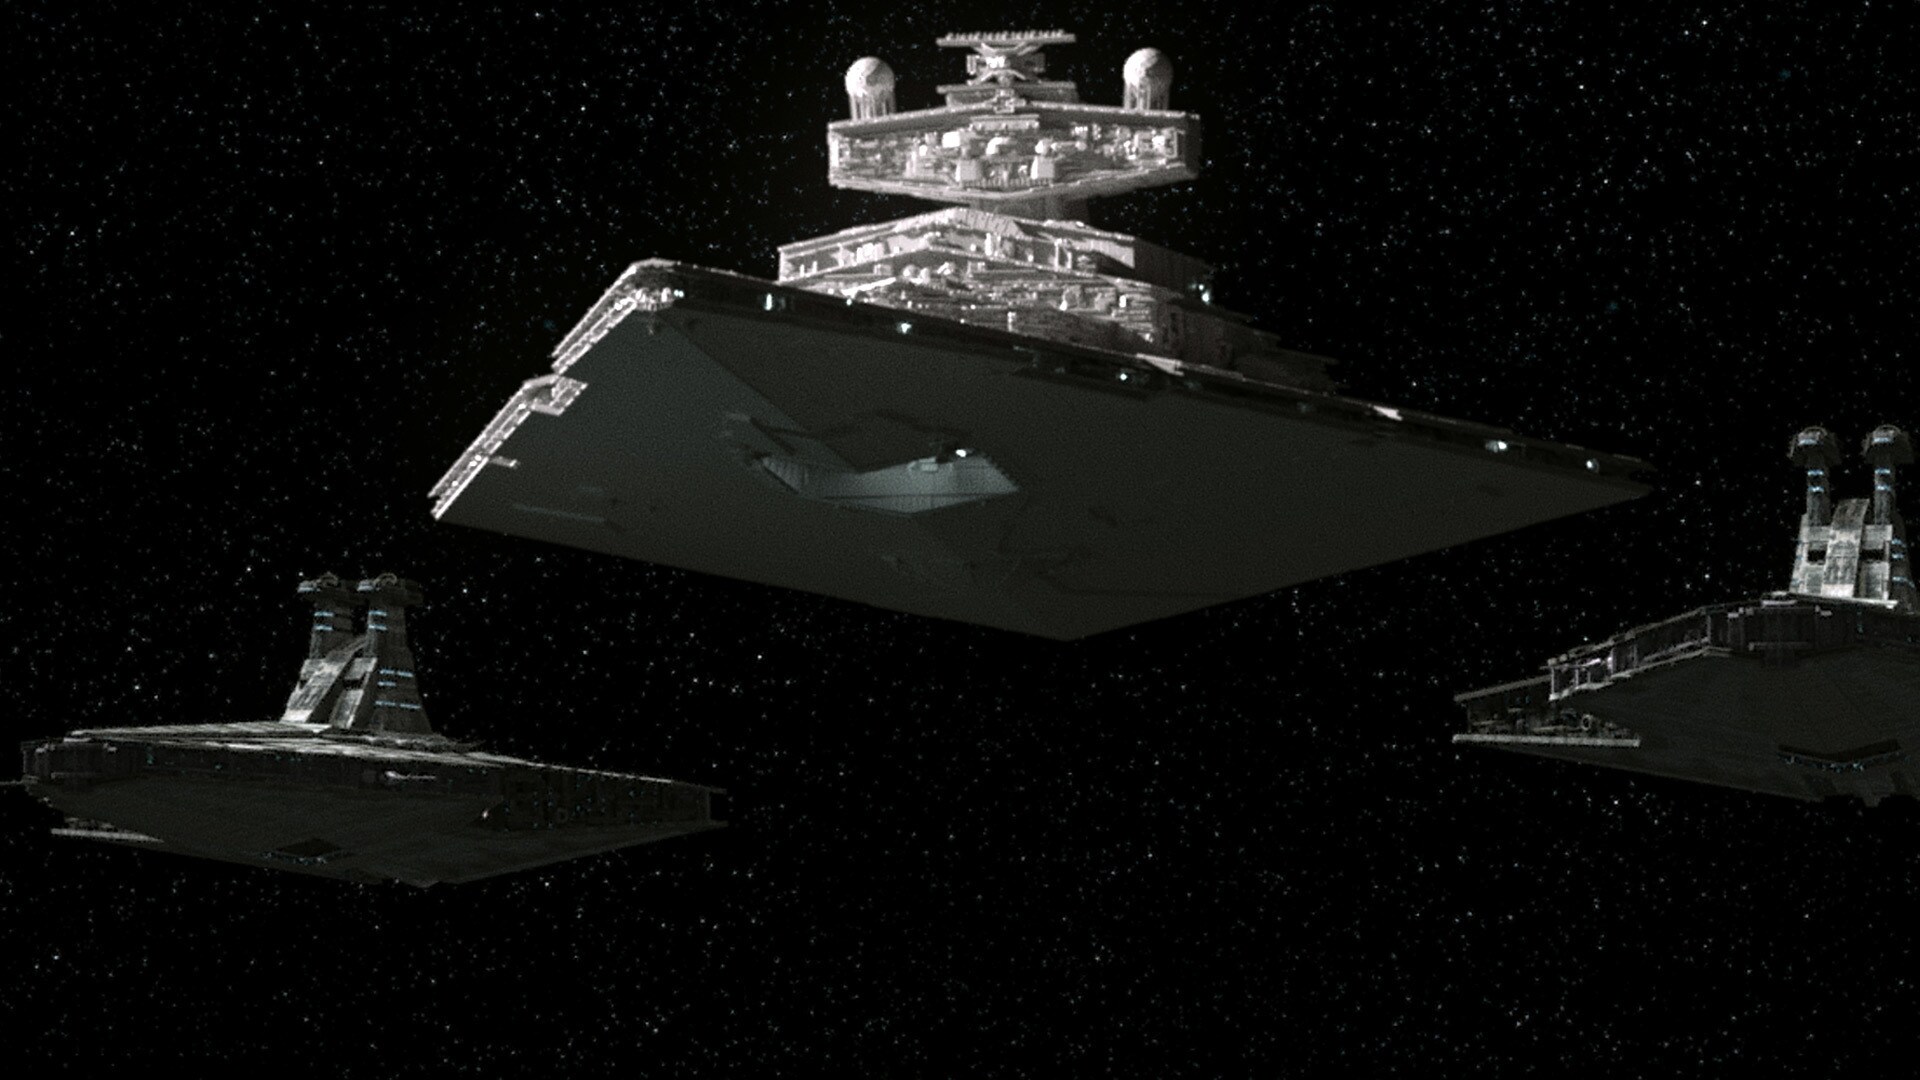 Tarkin’s arrival at the Tantiss facility includes an Imperial Star Destroyer accompanied by two V...